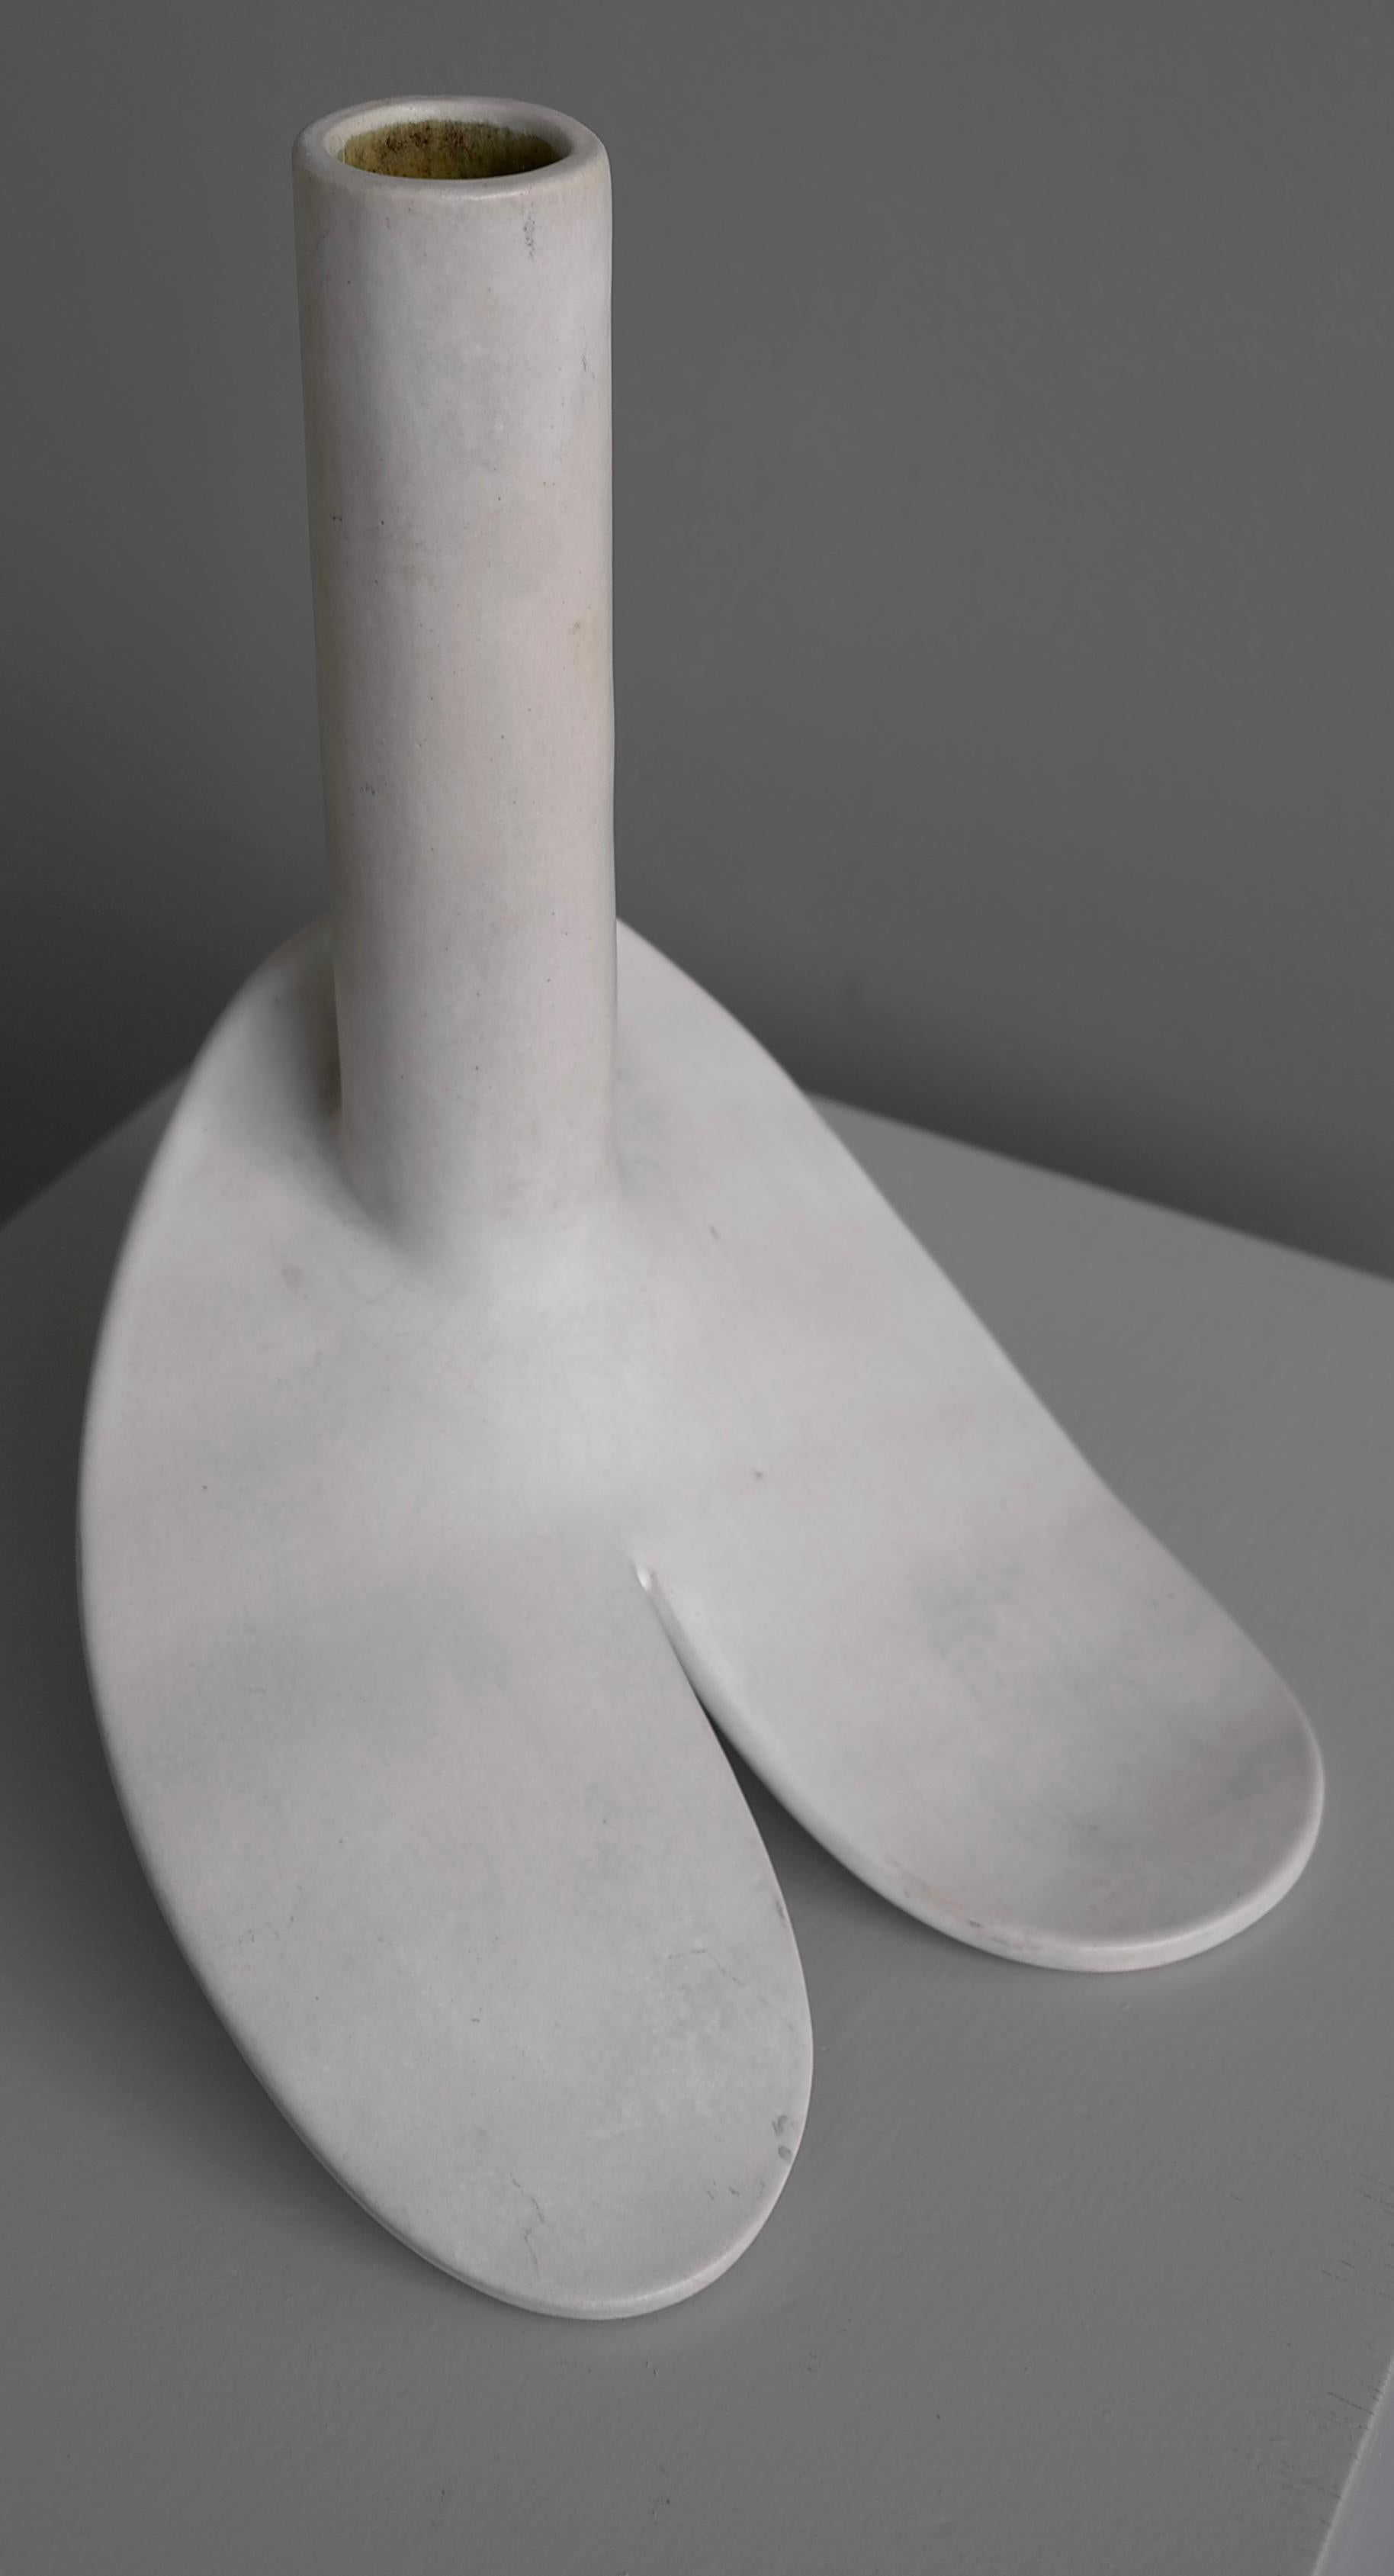 Ceramic Abstract Mid-Century Modern White Glazed Phallus Sculpture, The Netherlands 1976 For Sale